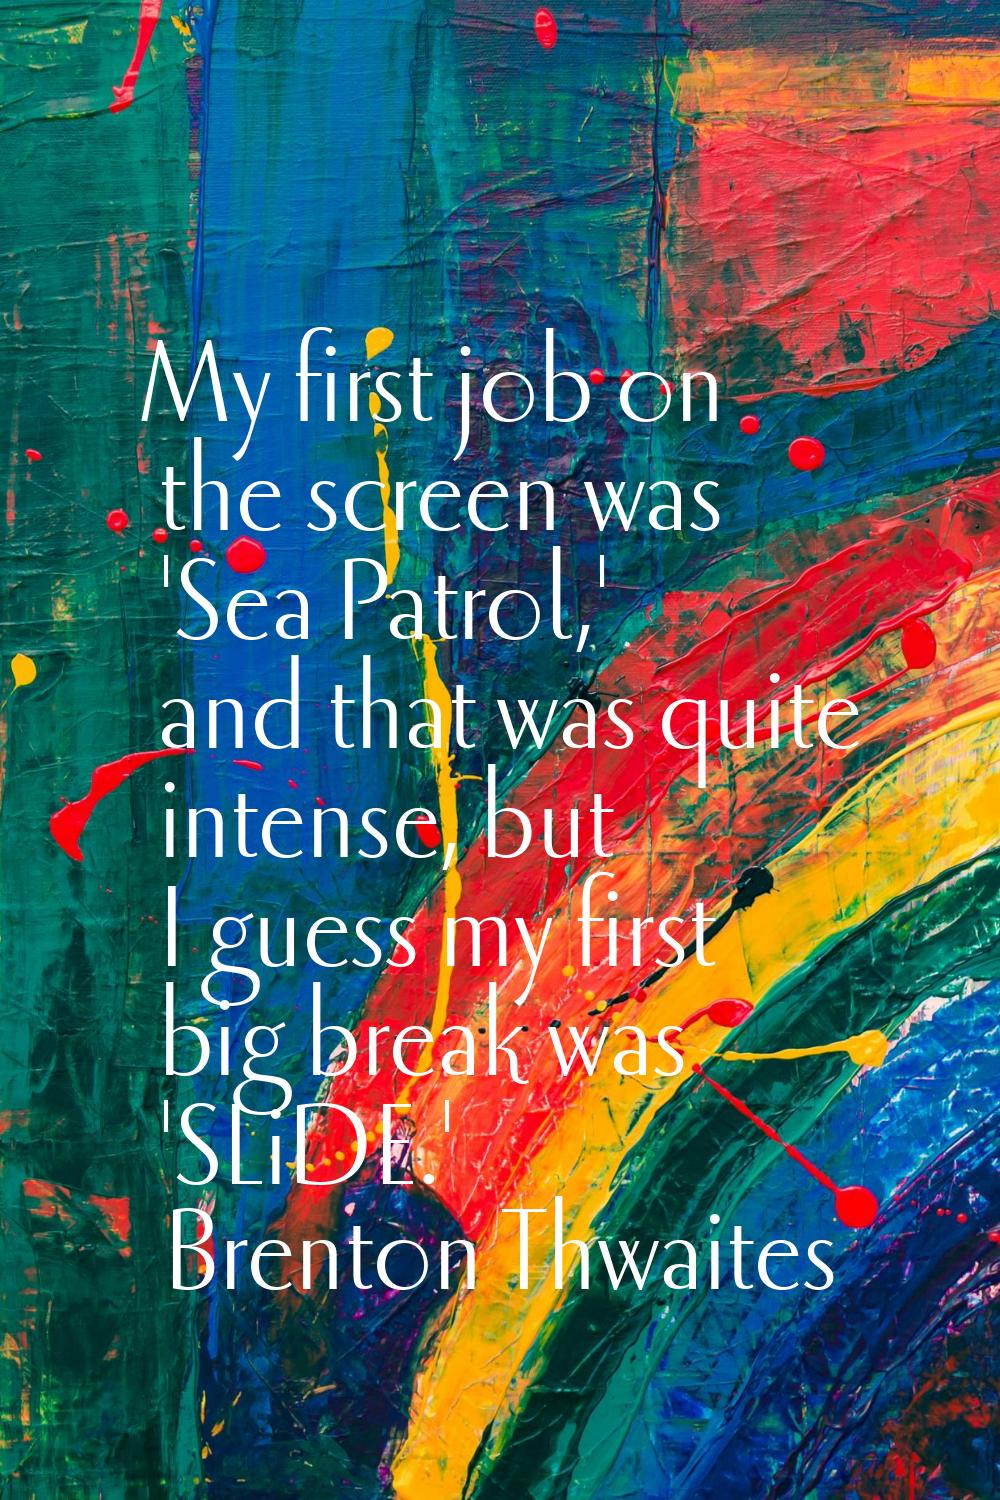 My first job on the screen was 'Sea Patrol,' and that was quite intense, but I guess my first big b